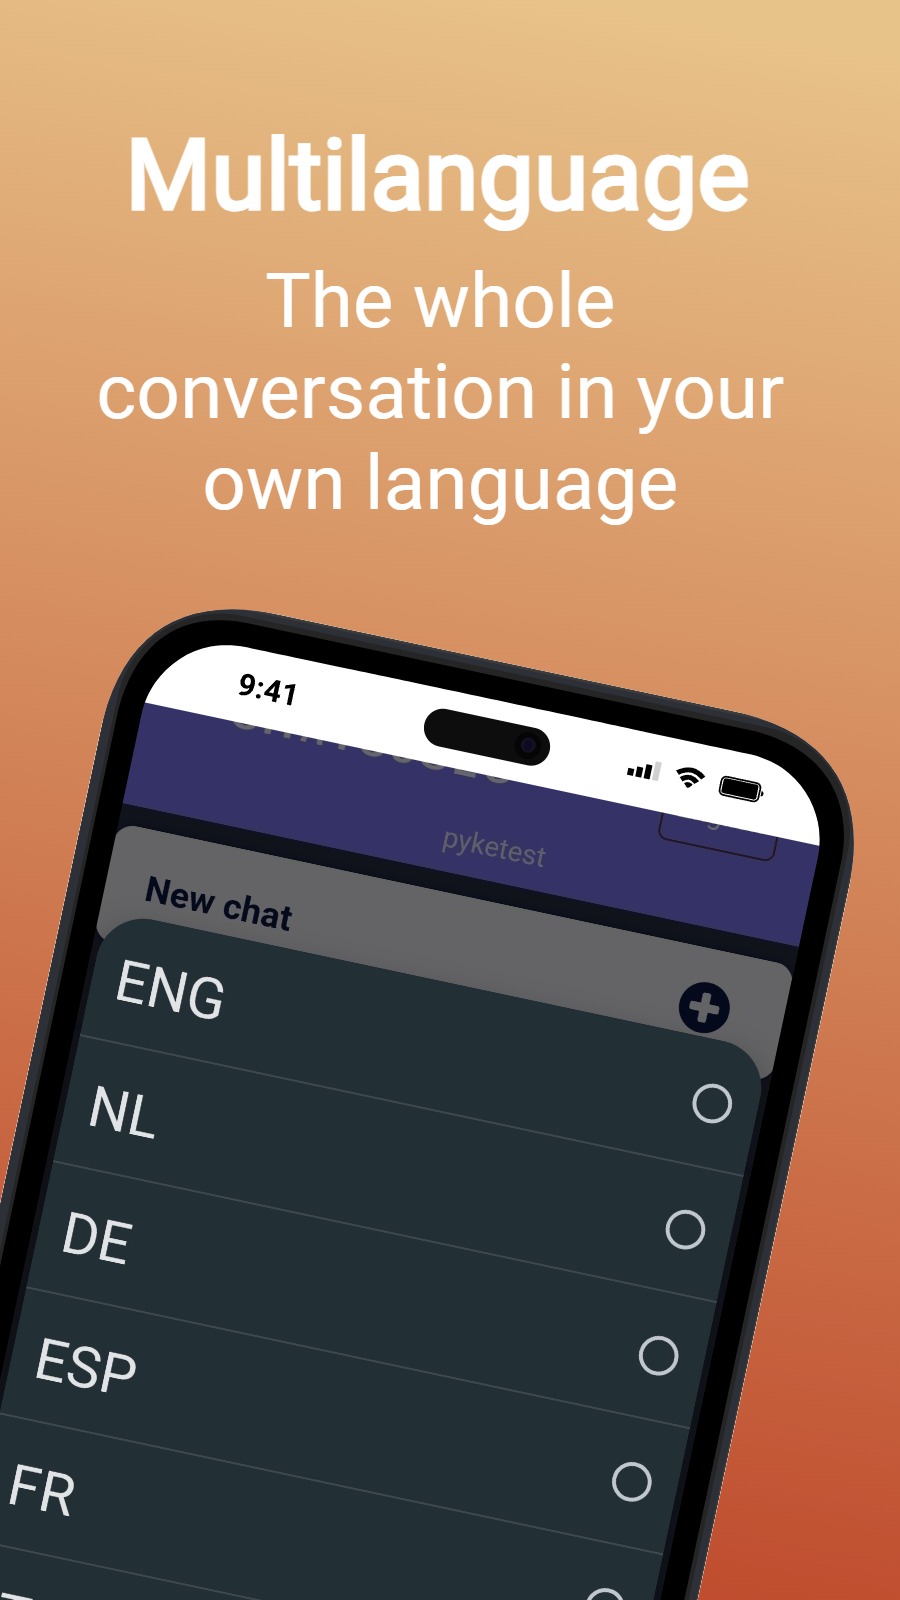 Multilanguage - The whole conversation in your own language